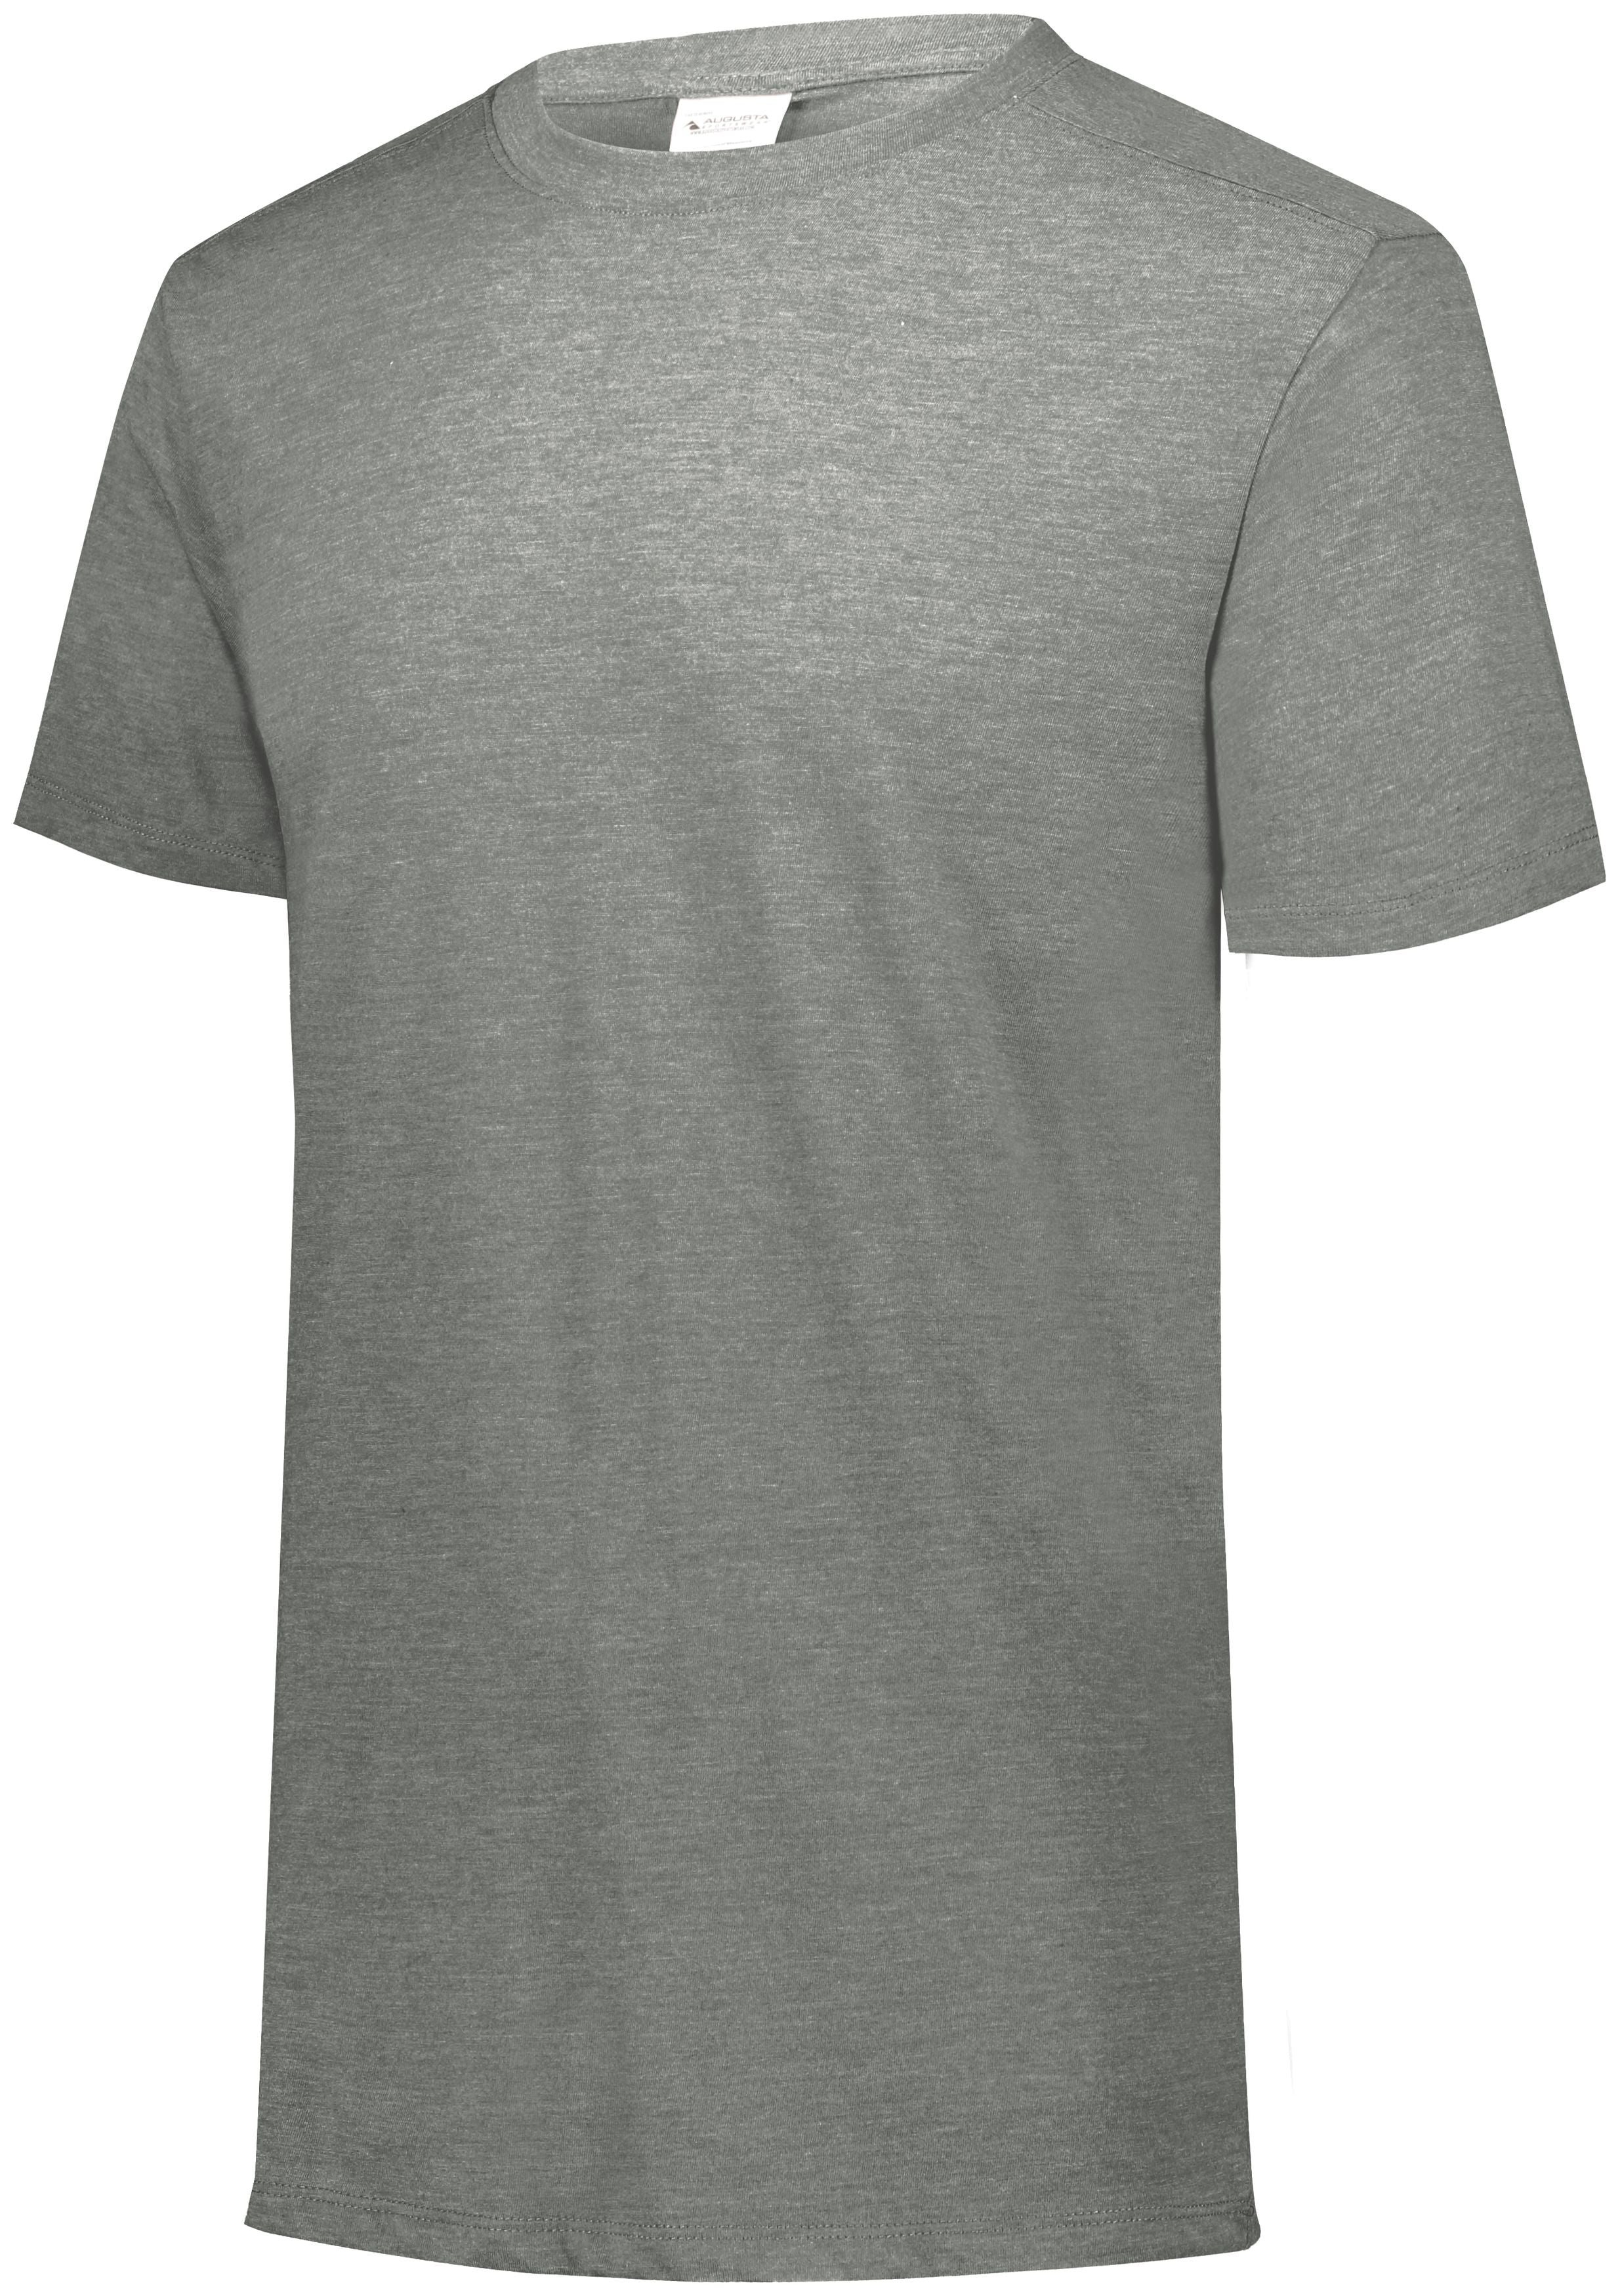 Augusta Sportswear Tri-Blend T-Shirt in Grey Heather  -Part of the Adult, Adult-Tee-Shirt, T-Shirts, Augusta-Products, Shirts product lines at KanaleyCreations.com